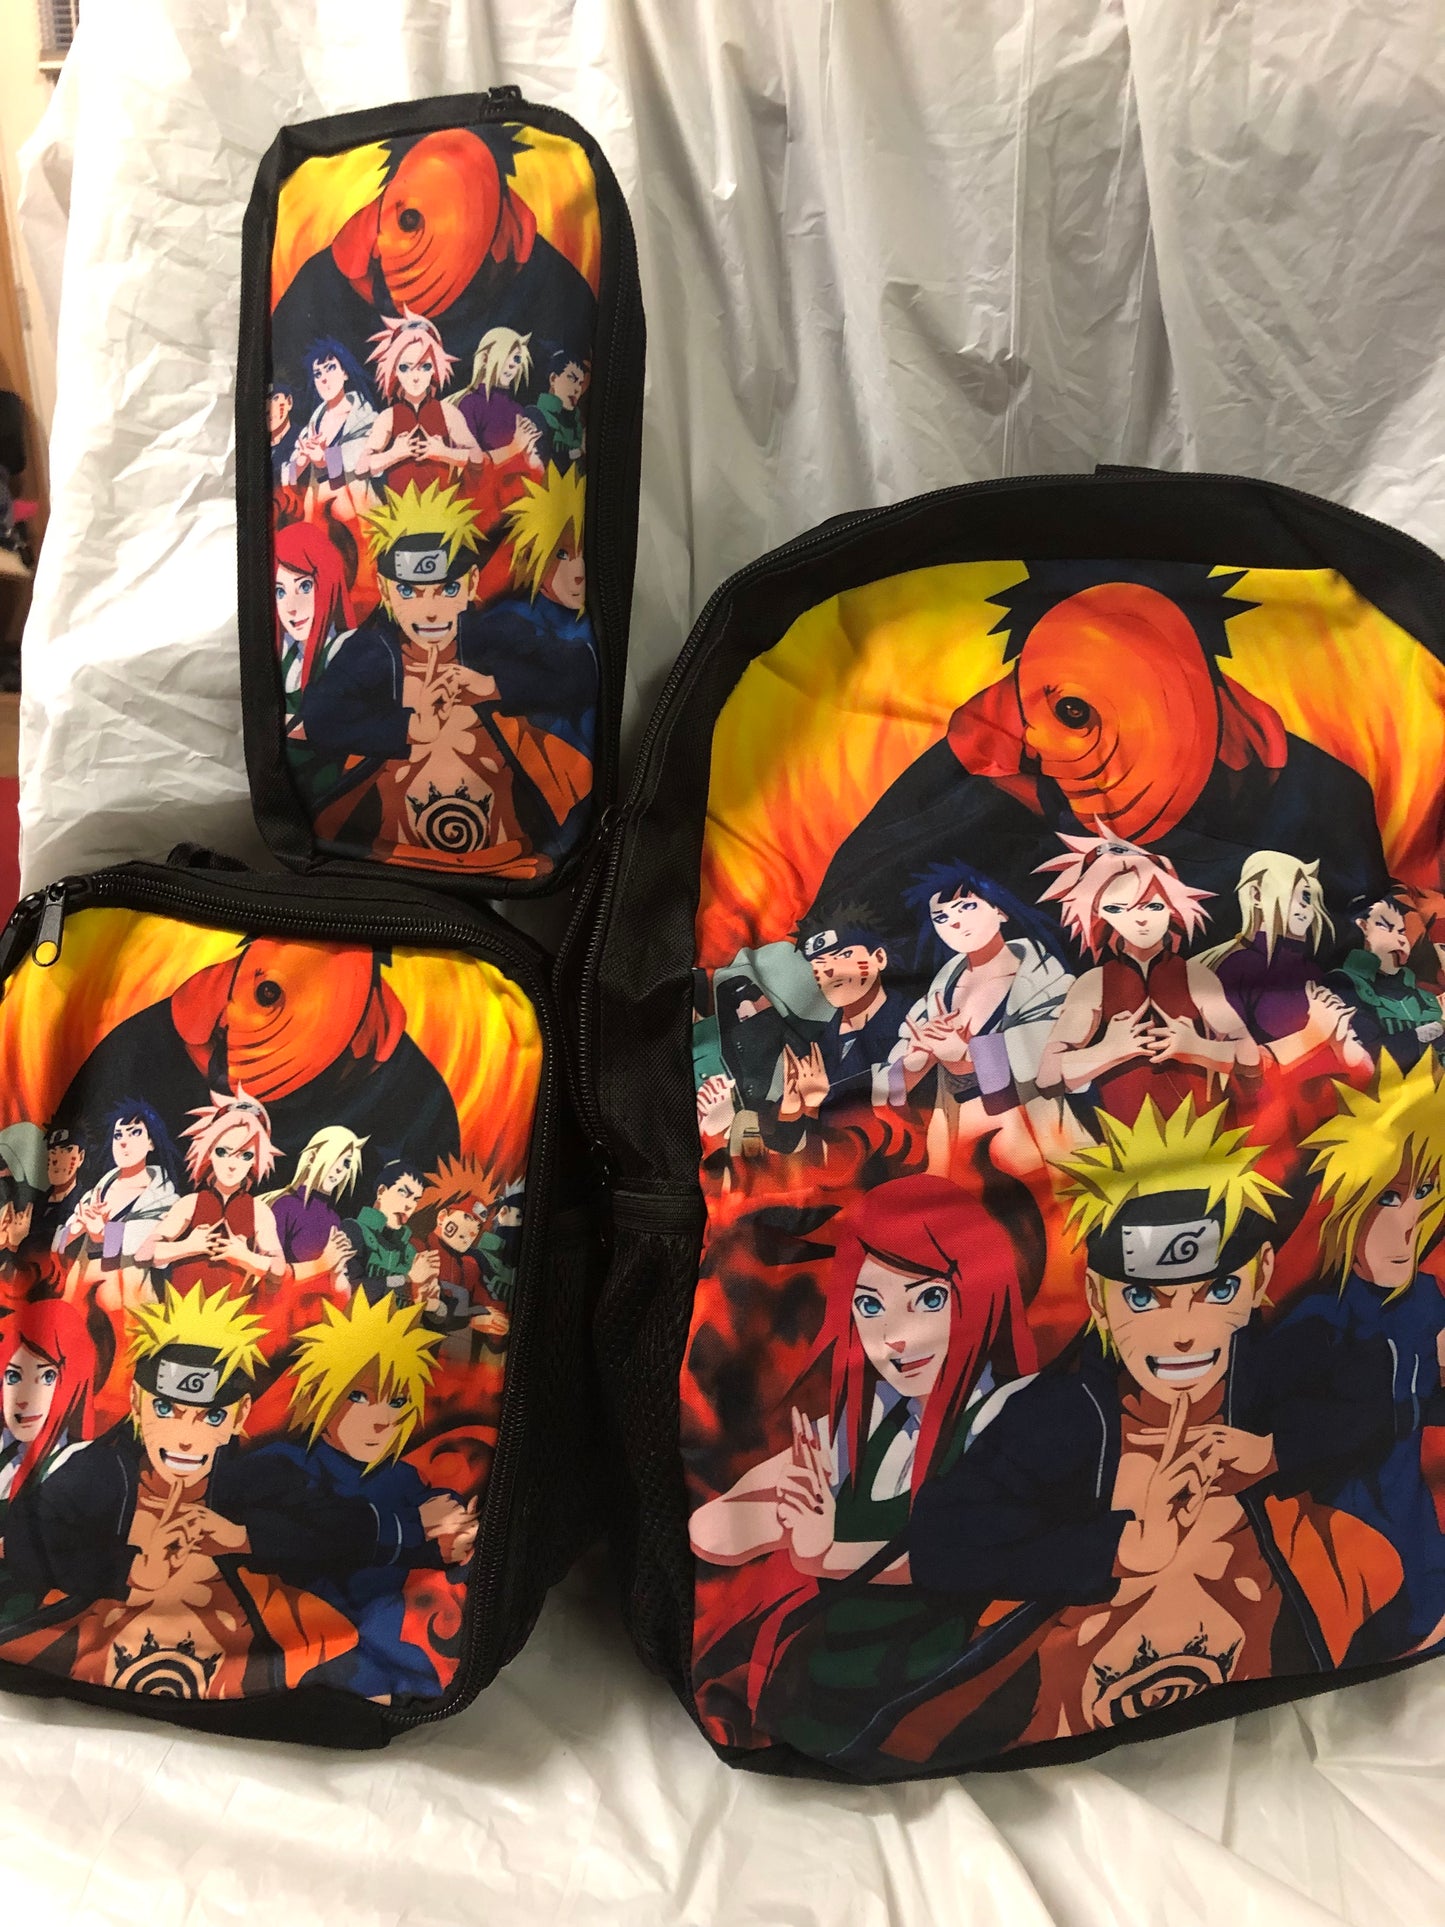 Anime Naruto Backpack For Adult Girl Or Boy "New Arrival"